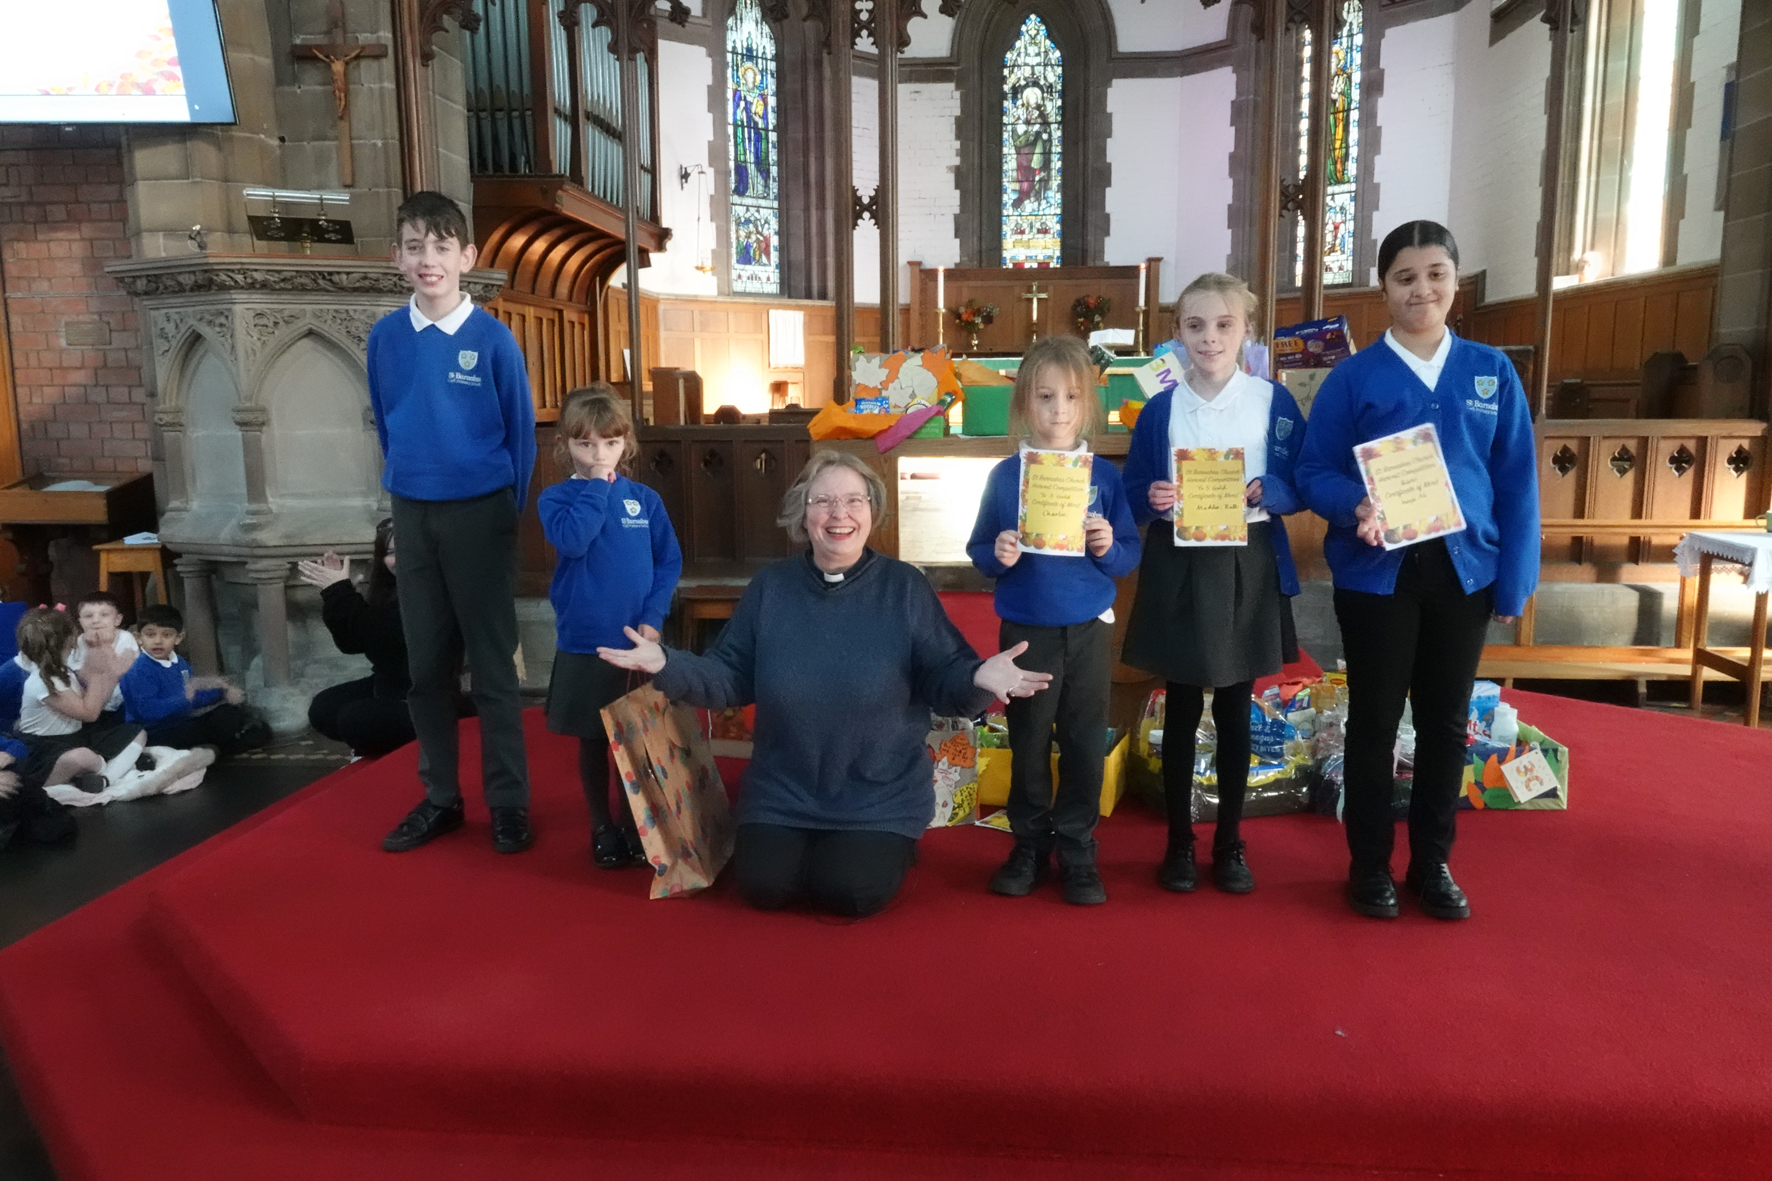 The Revd Sarah Northall with competition winners from St Barnabas school